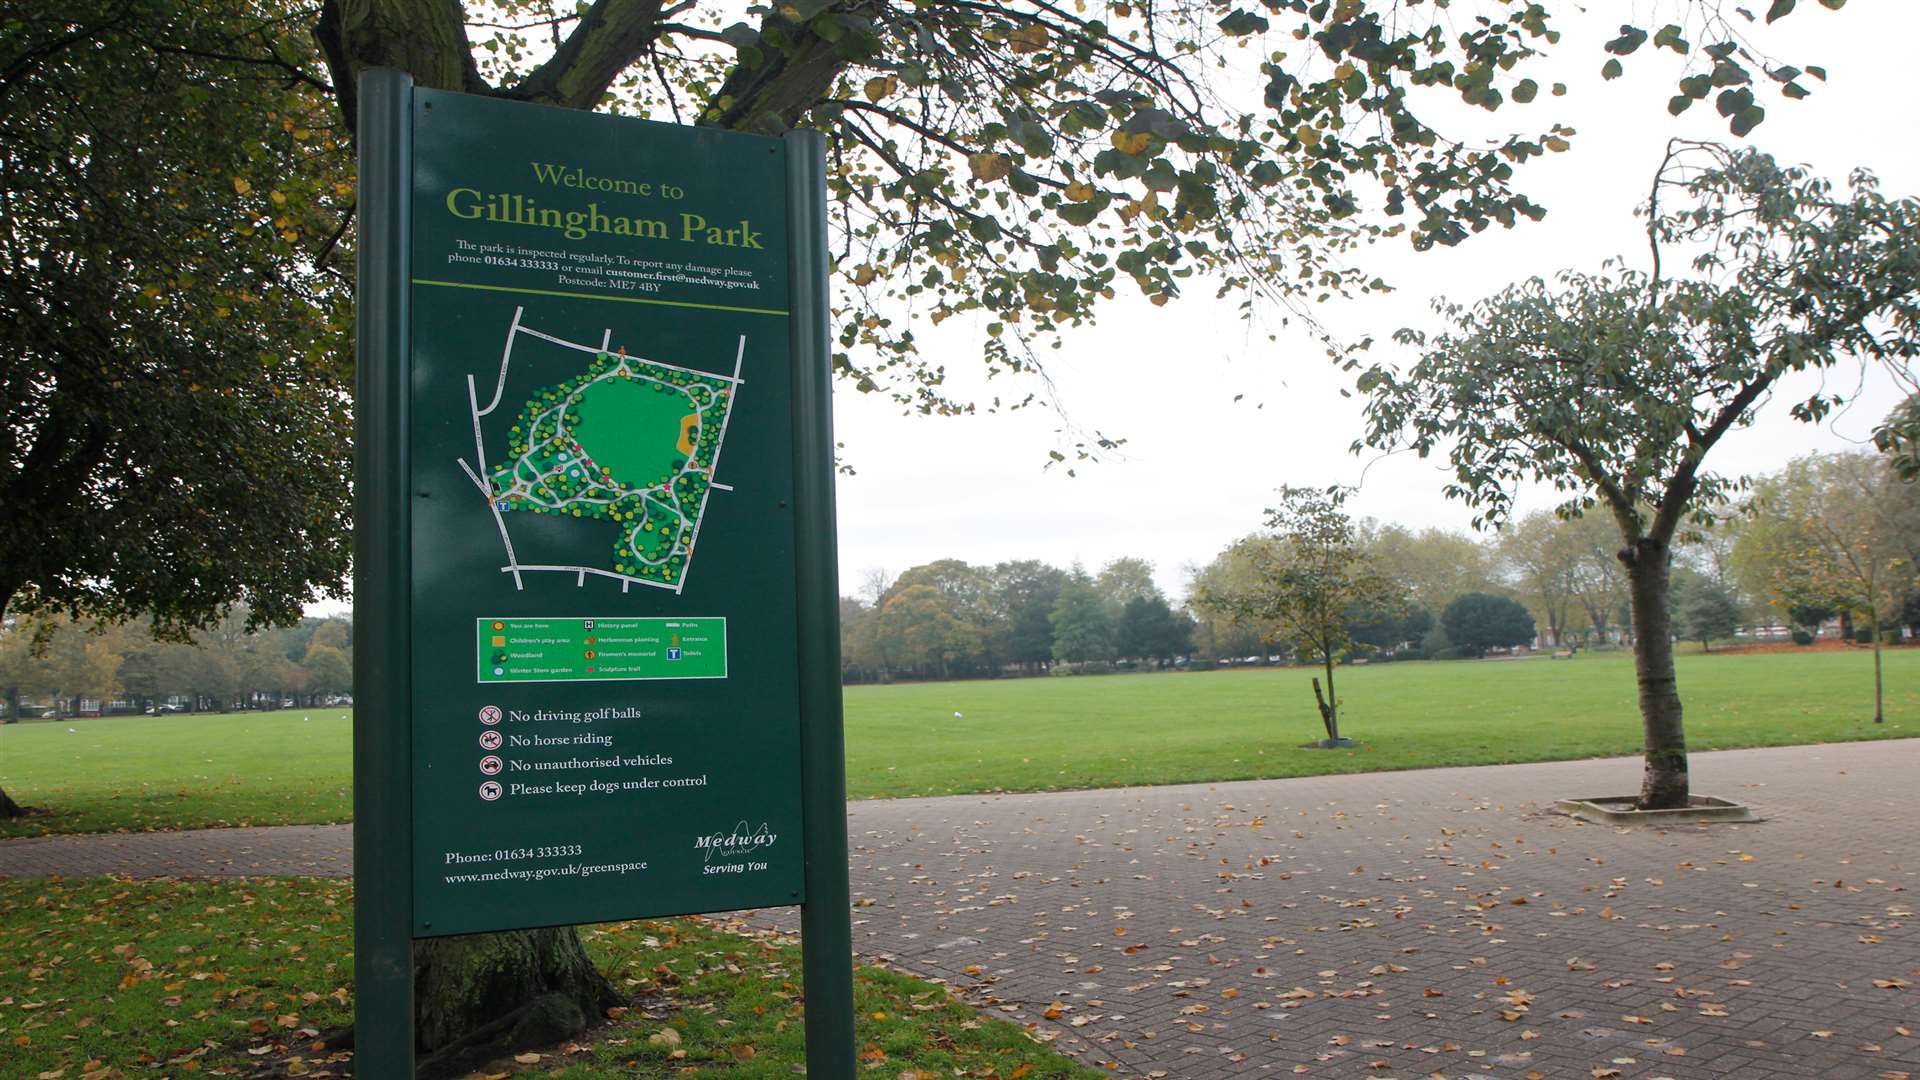 The robbery happened in Gillingham Park